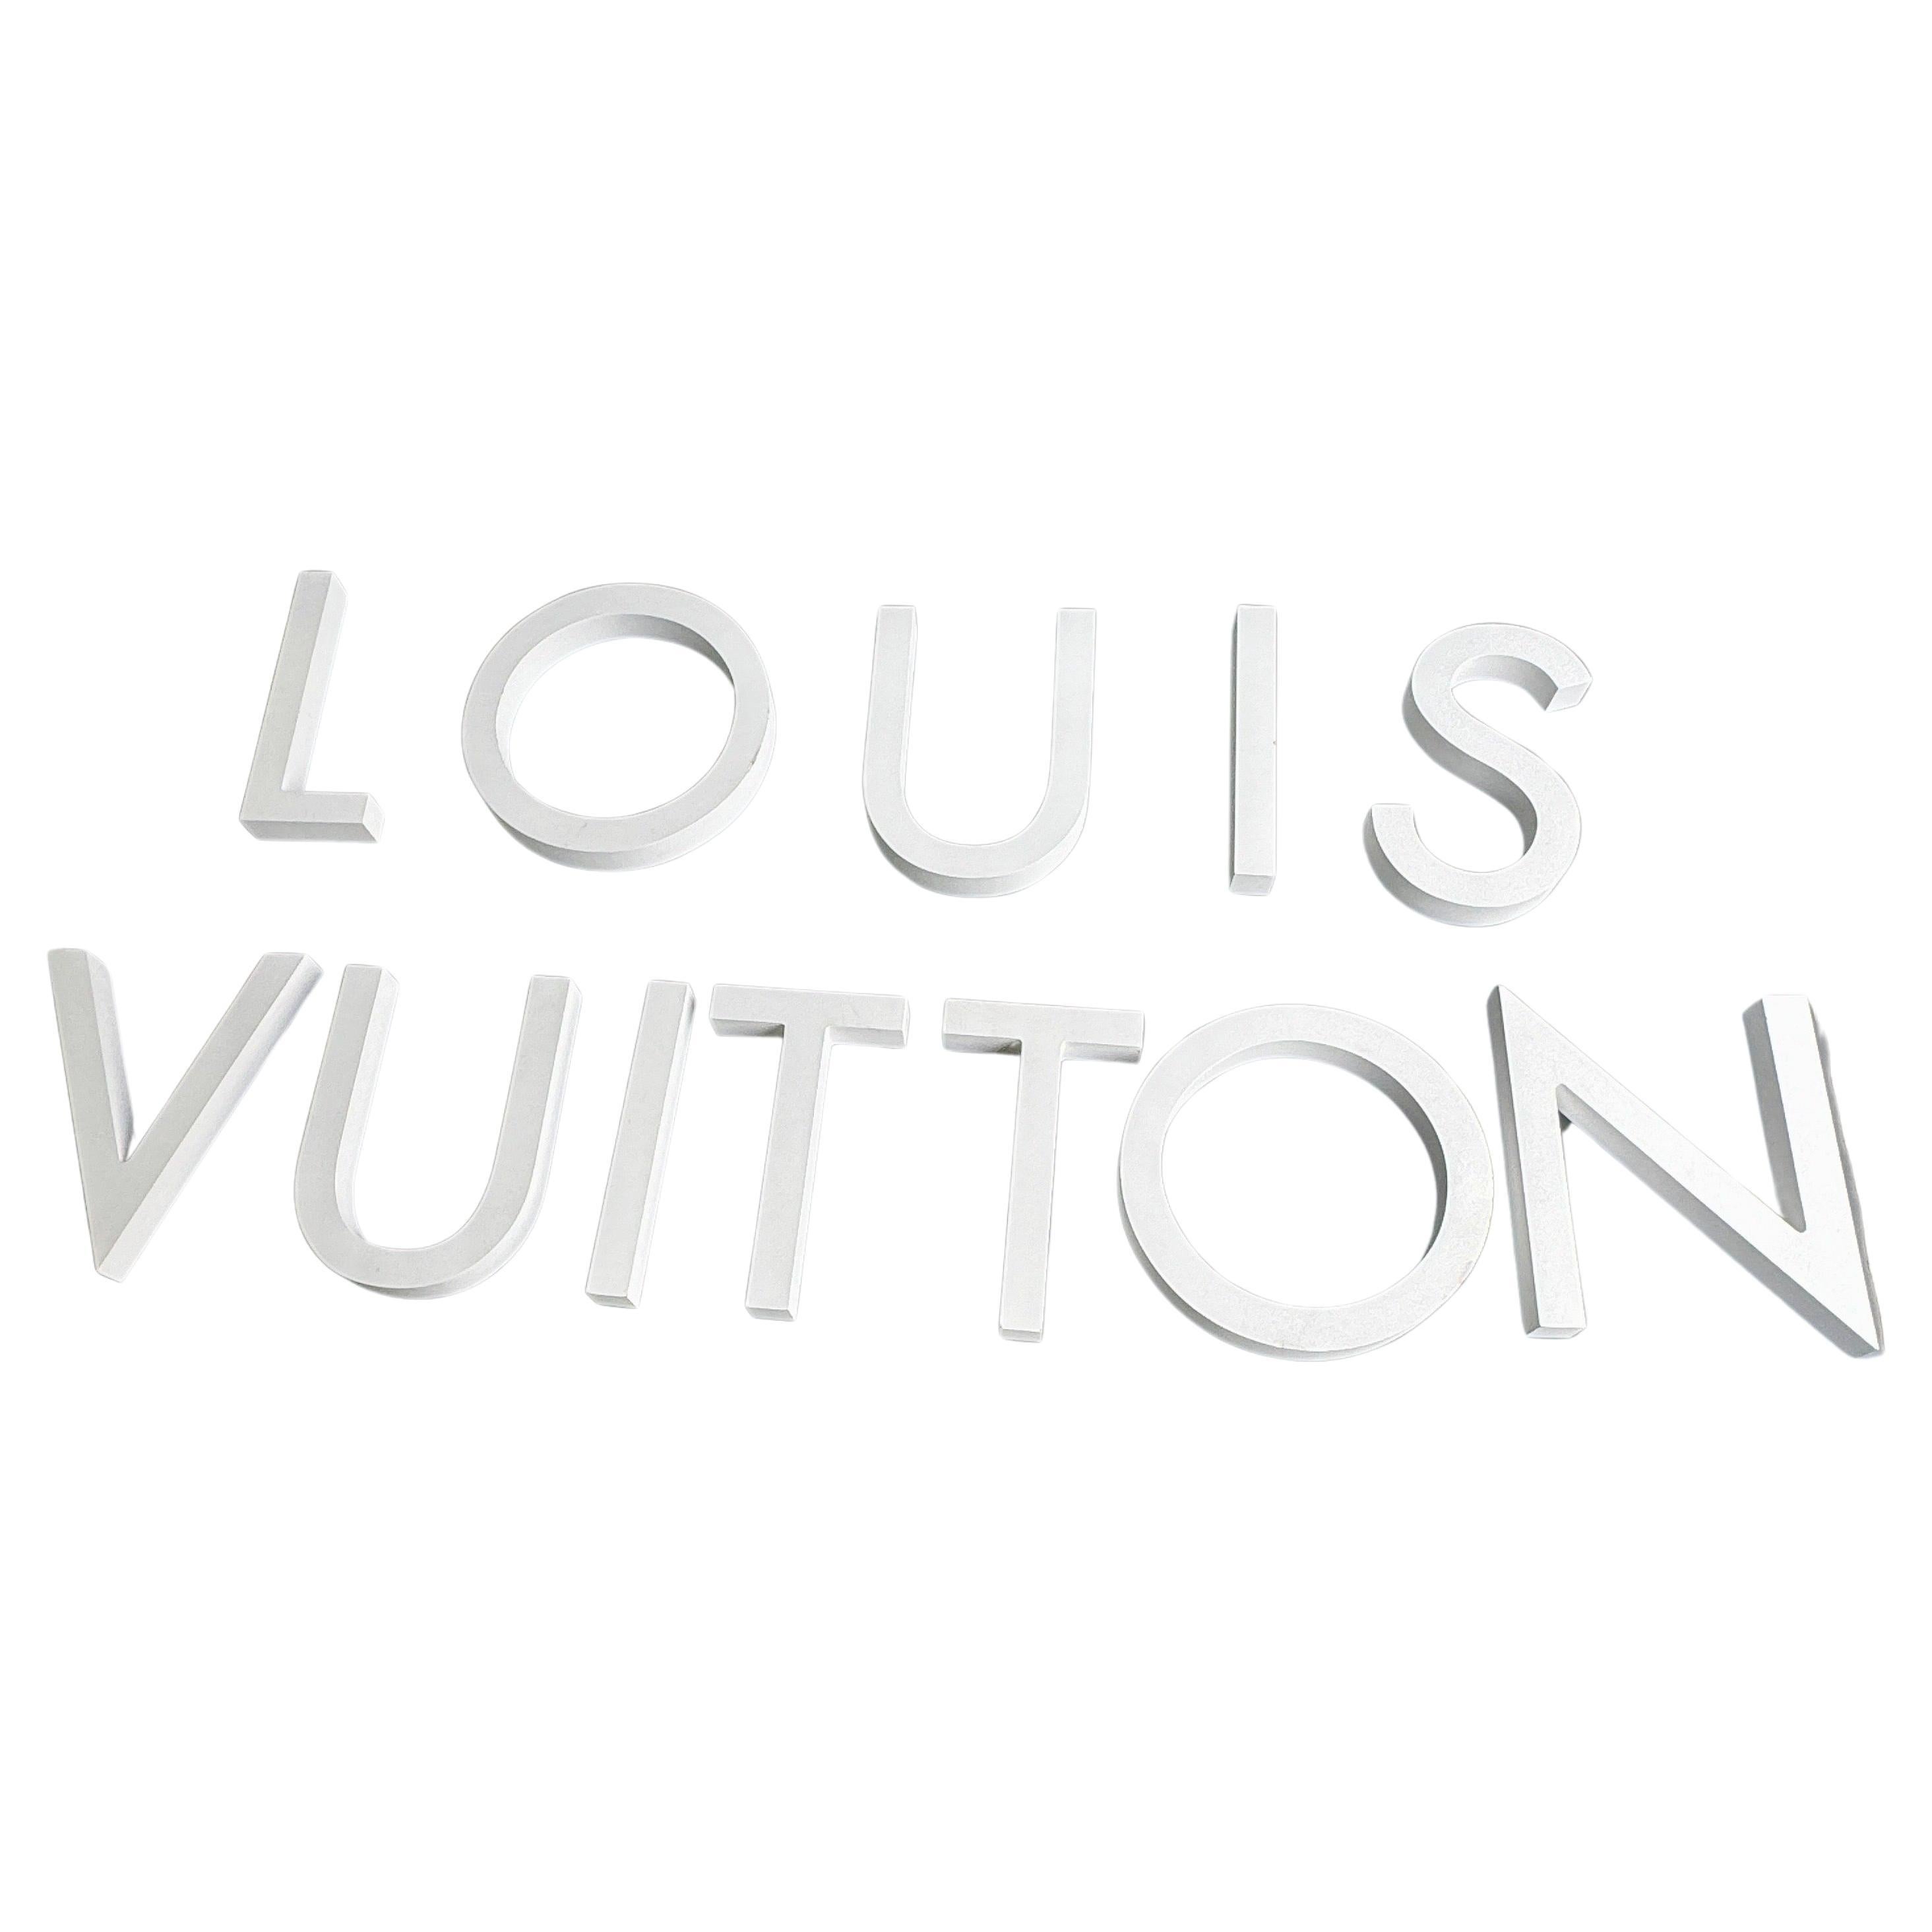 Large French Louis Vuitton Letters Designer Store Display For Sale